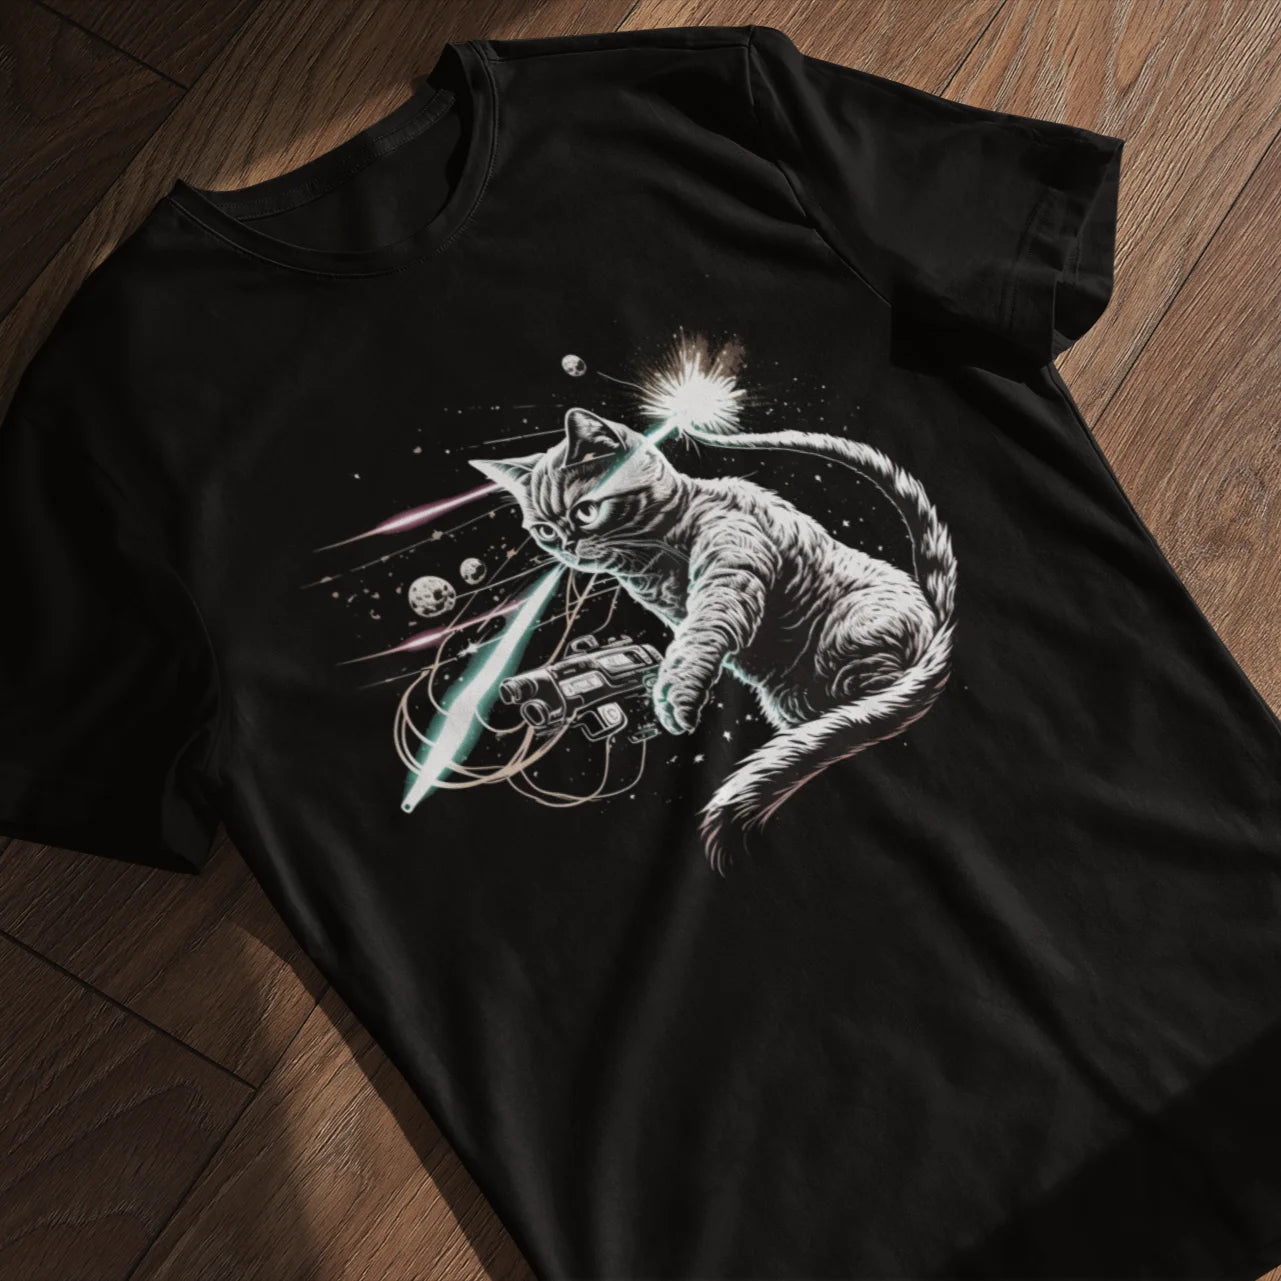 psychedelicBRANDz's Nebula Nightprowler featuring a warrior space cat on a black shirt